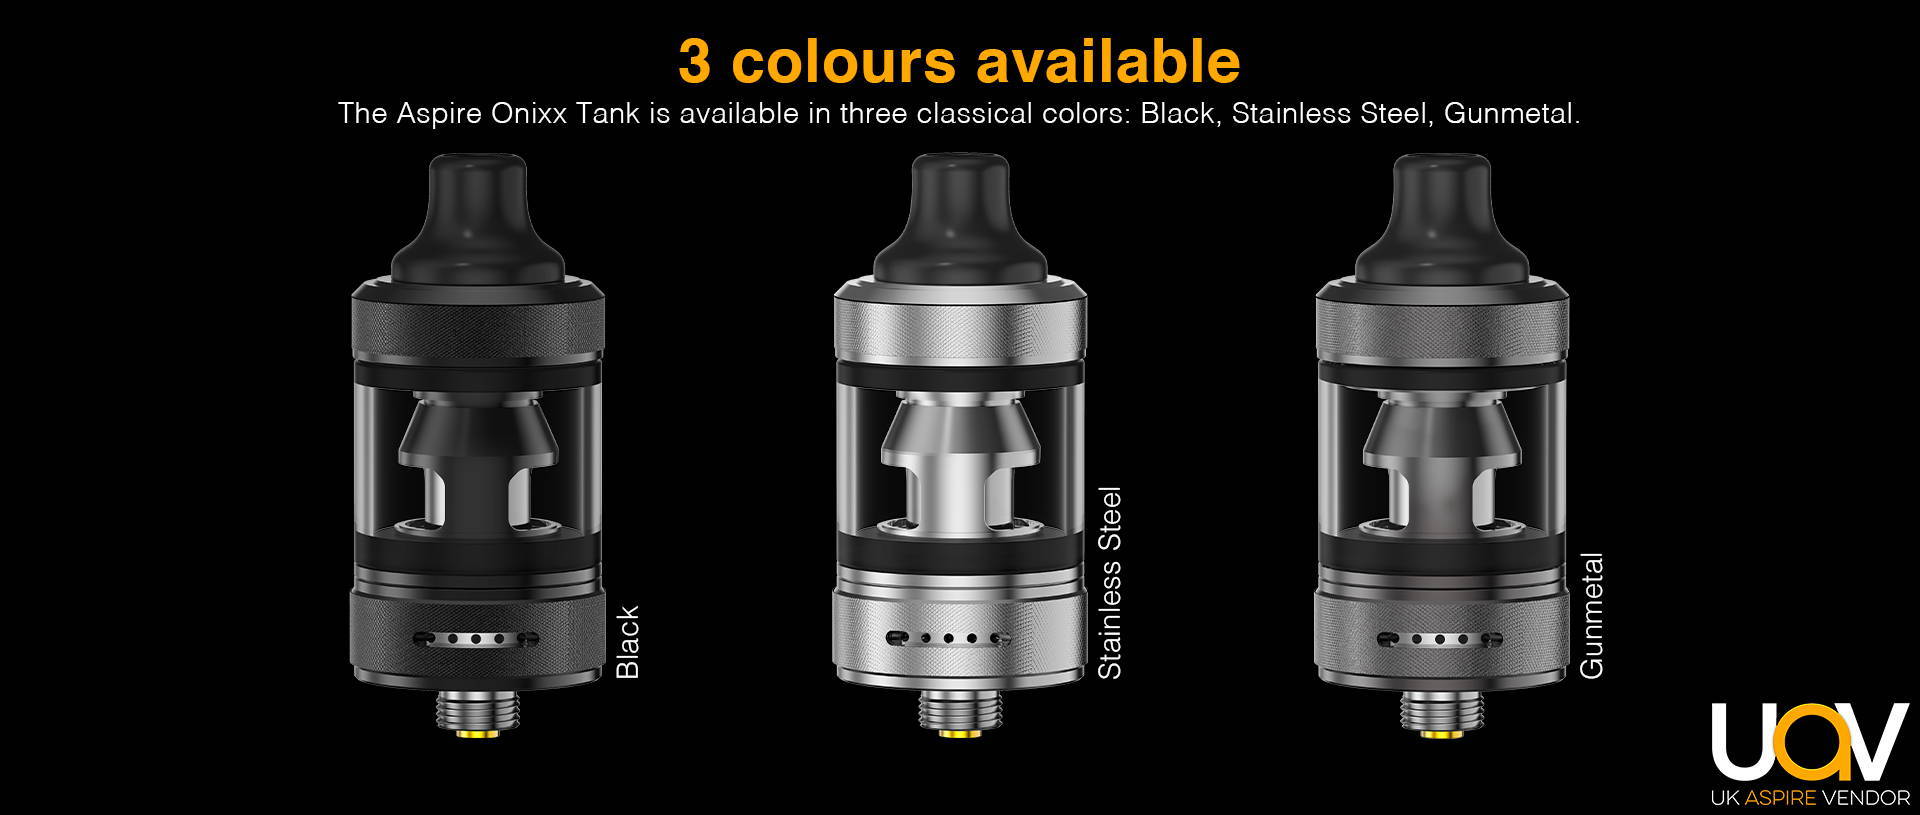 Three Classical Colors Available Onixx Tank is available in three classical colors: Black, Stainless Steel, Gunmetal.